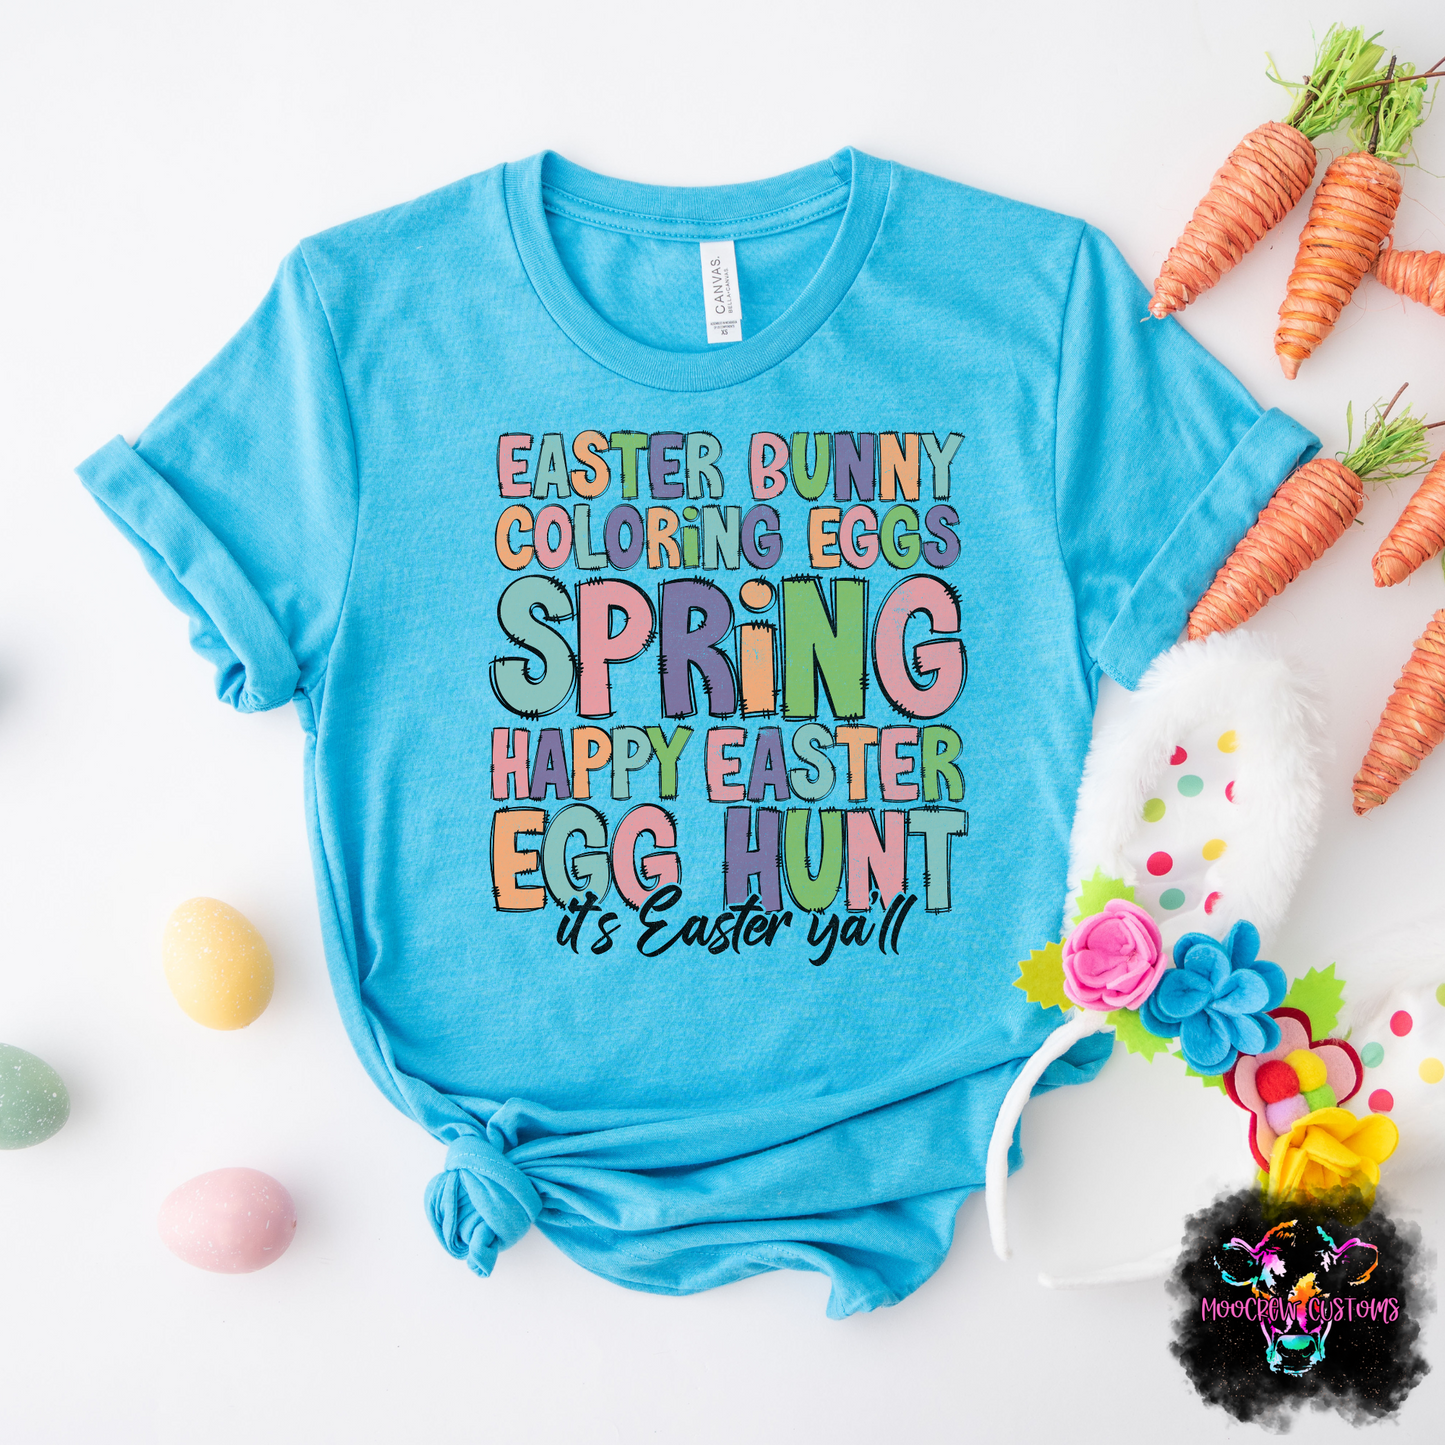 It's Easter Yall Doodle Tshirt